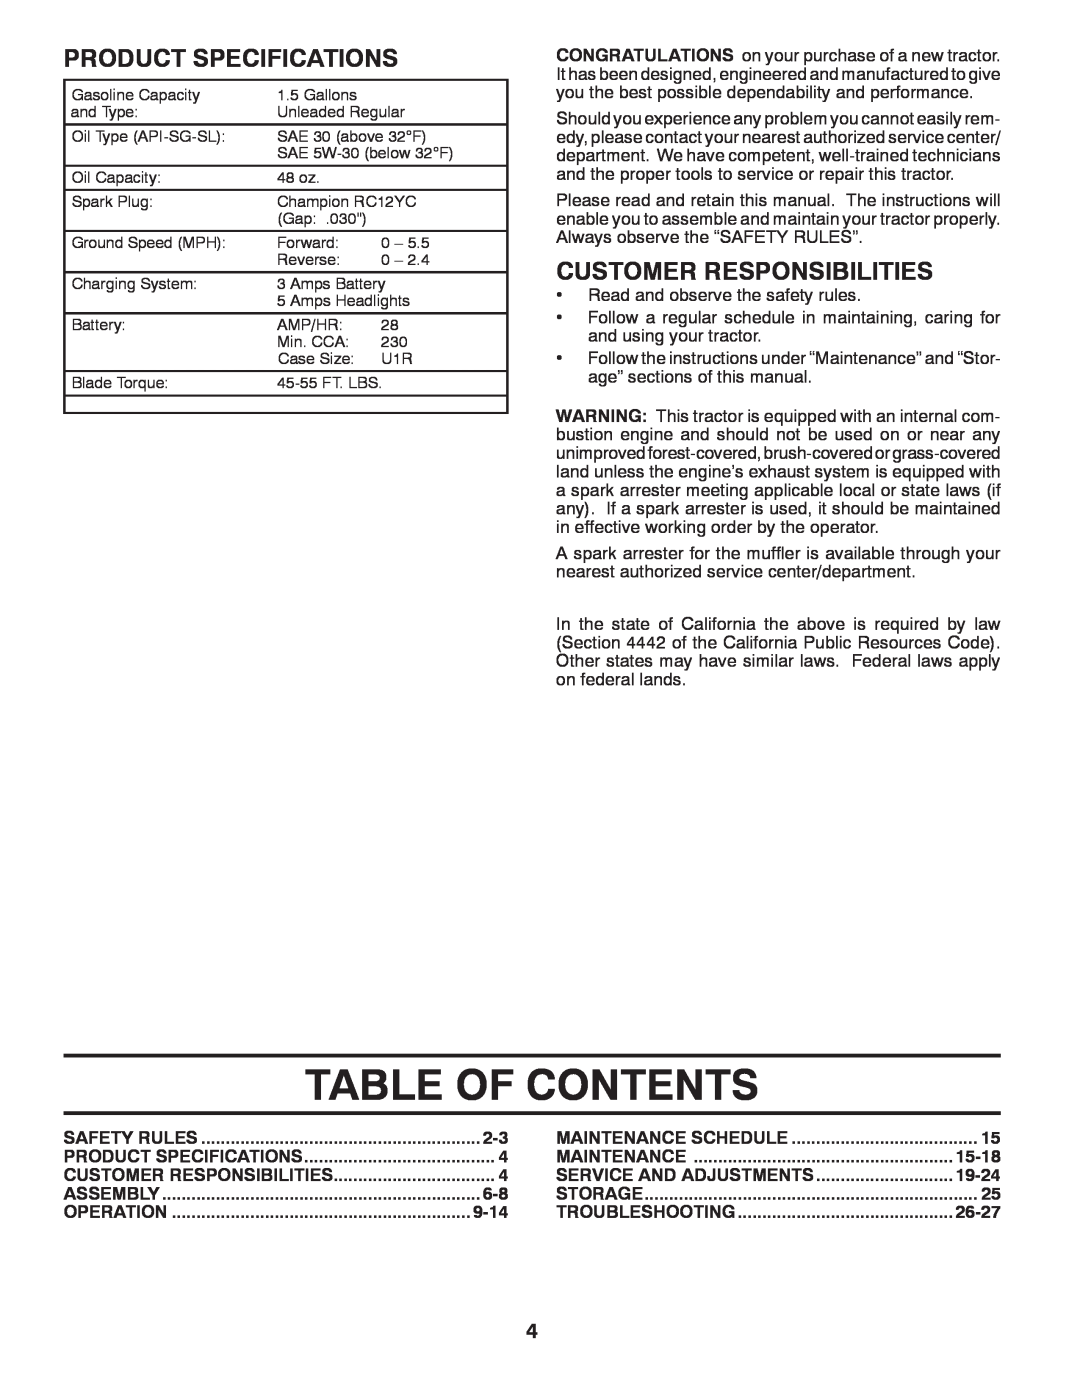 McCulloch M17538H manual Table Of Contents, Product Specifications, Customer Responsibilities, 9-14, 15-18, 19-24, 26-27 